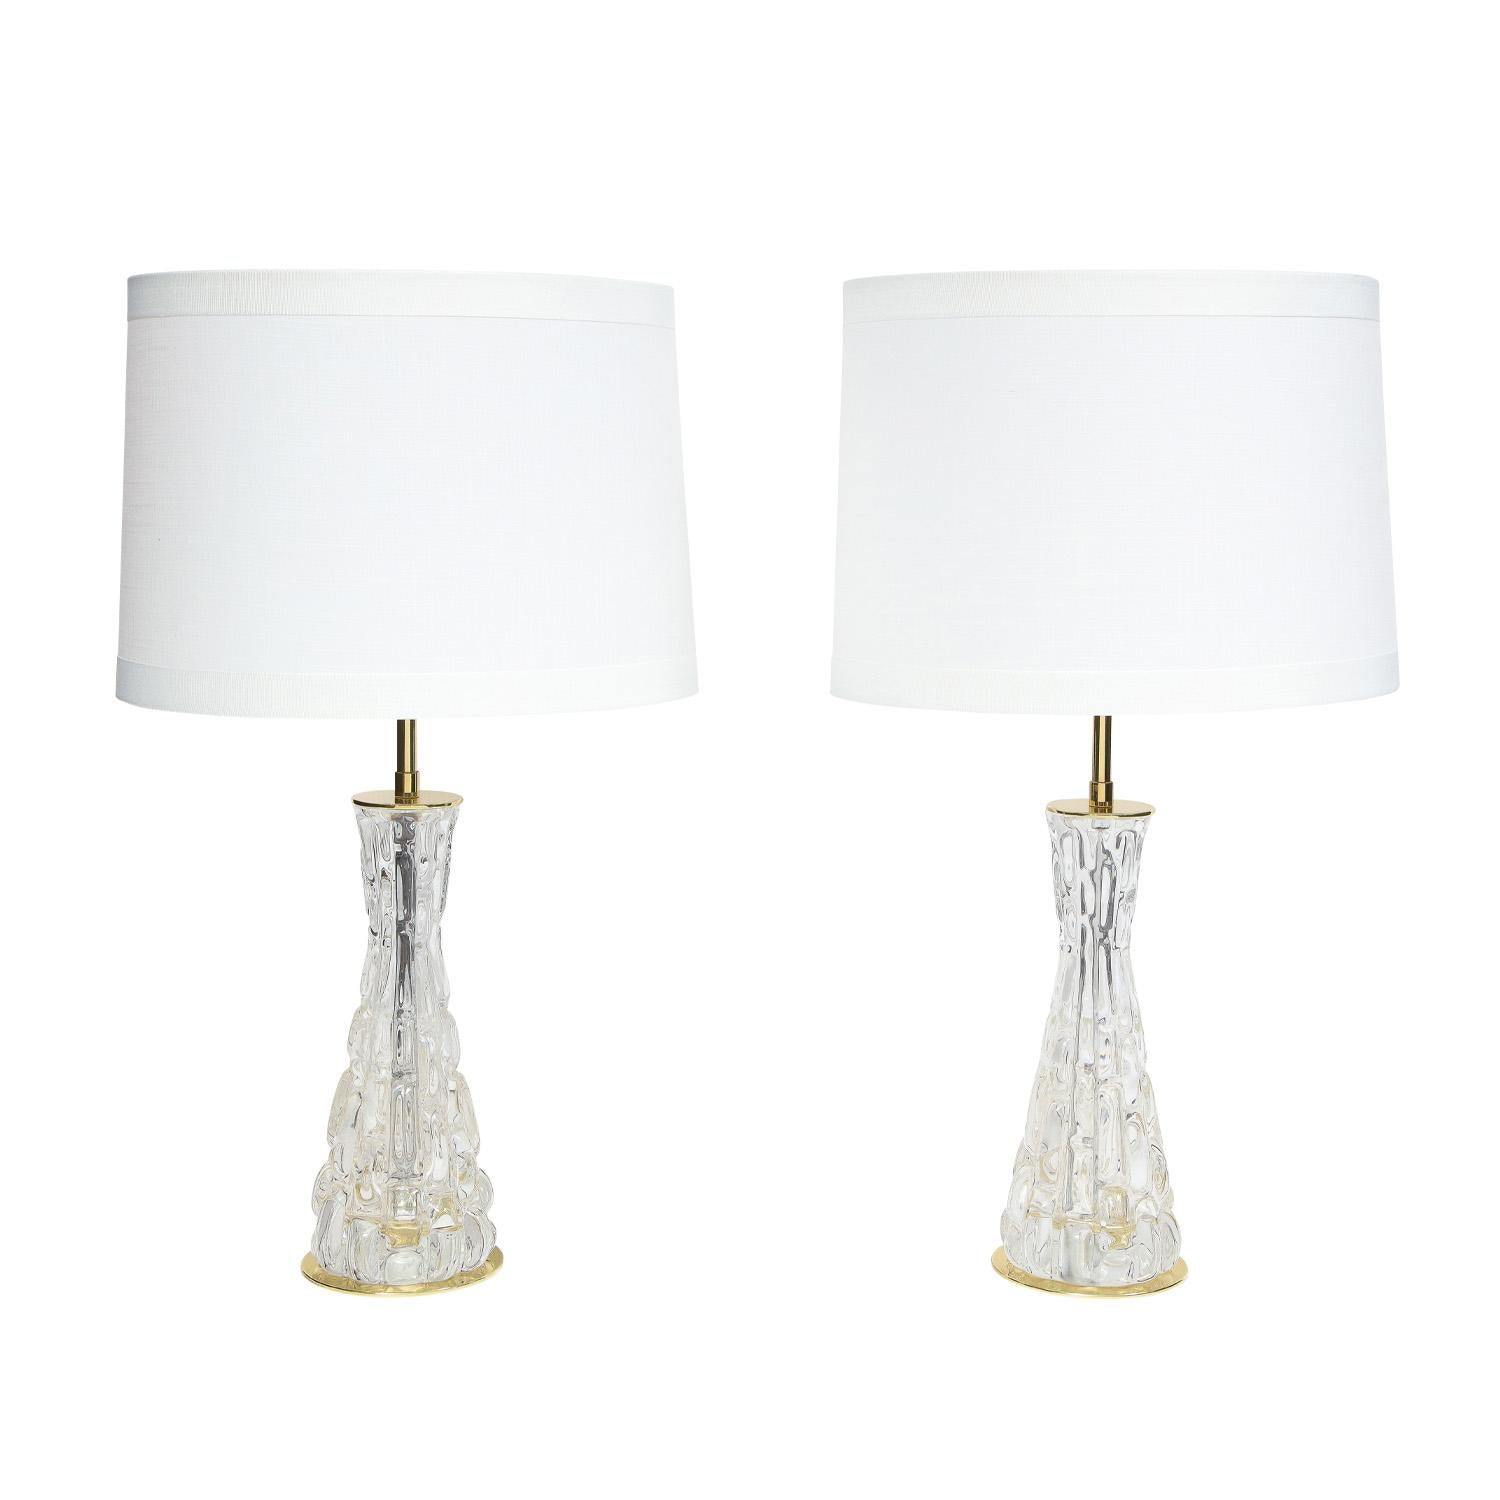 Pair of exquisite table lamps with textured glass by Carl Fagerlund for Orrefors and sold by Hansen Lighting, American 1957. These have been newly rewired and polished and are in like-new condition.

Measures: Diameter: 5 inches 
Height: 23